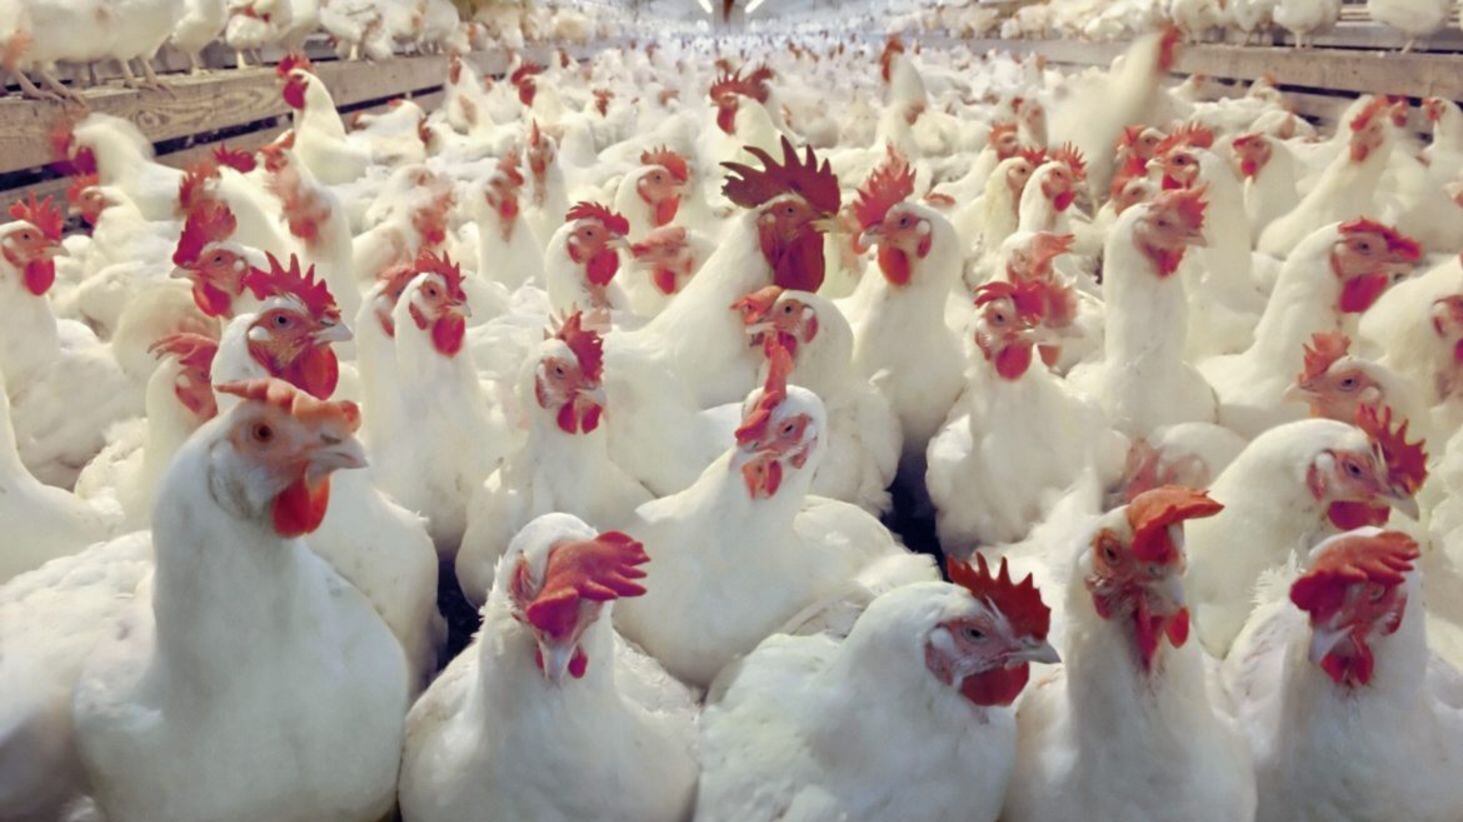 Poultry firm Moy Park is to cease processing live birds at Ballymena due to &quot;challenging market conditions&quot; 